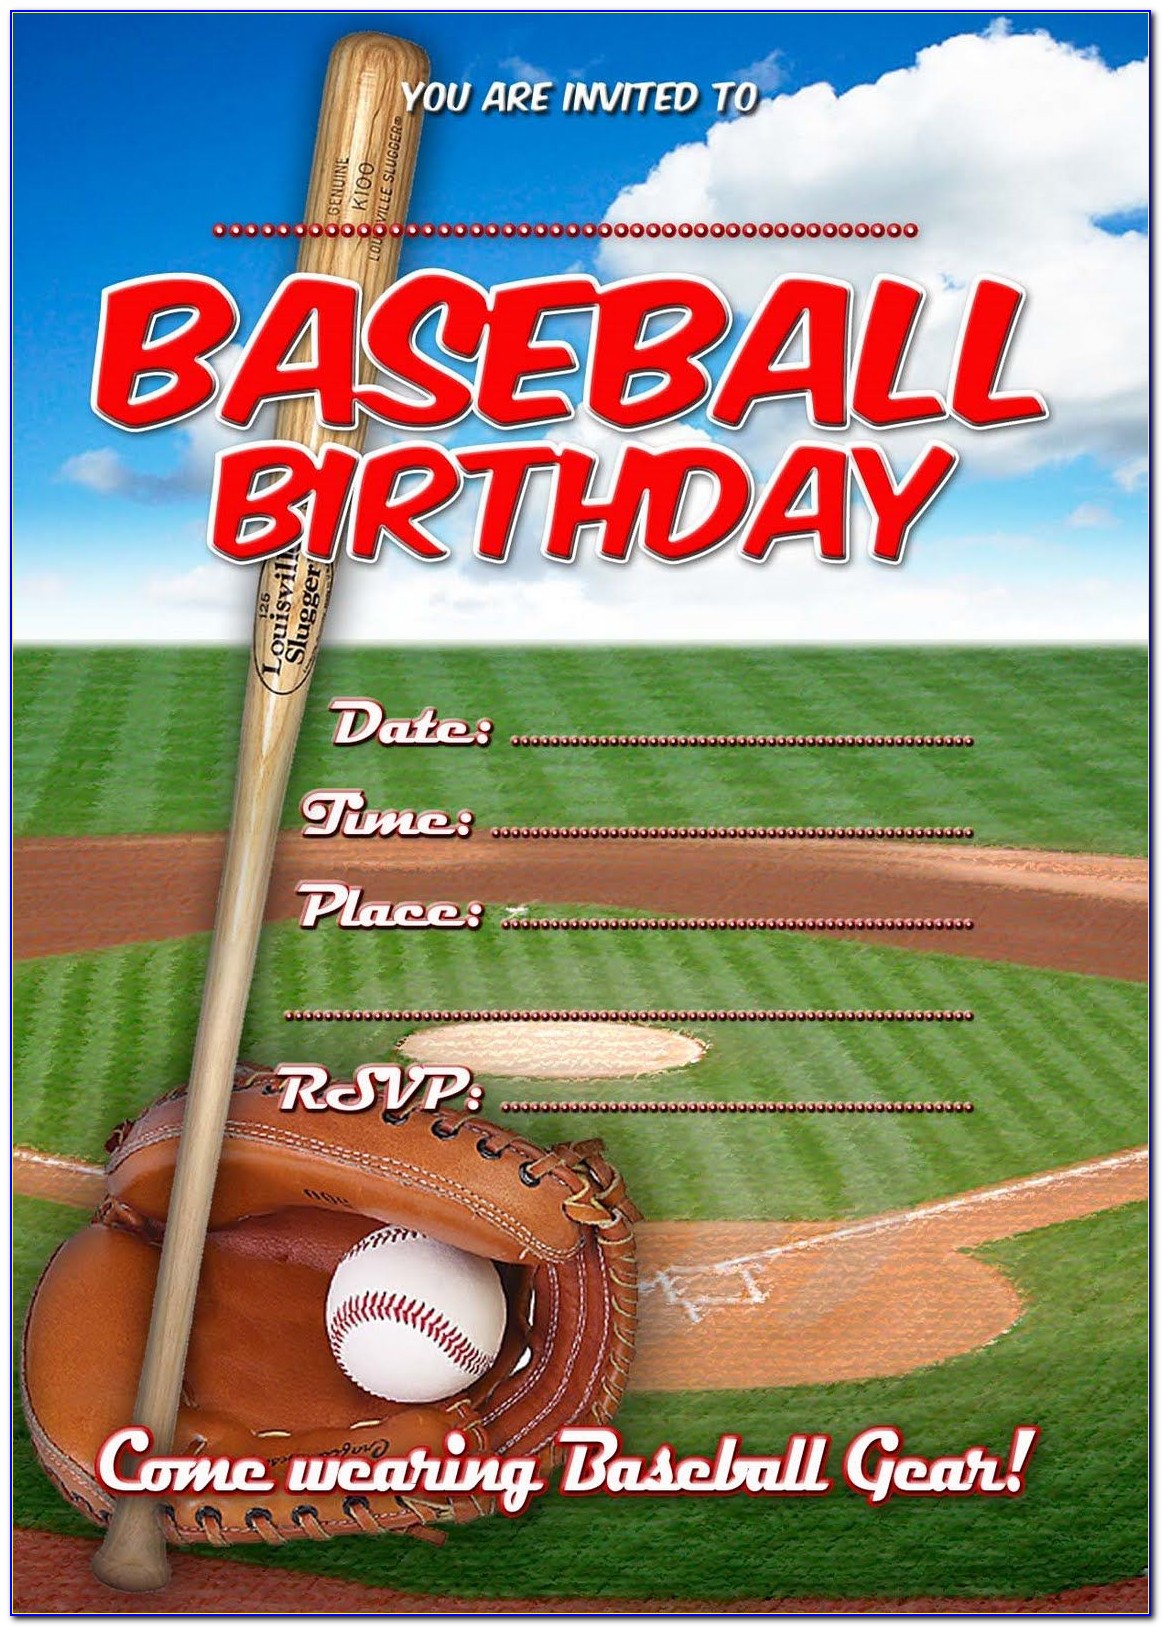 Baseball Or Bows Gender Reveal Invitations Template